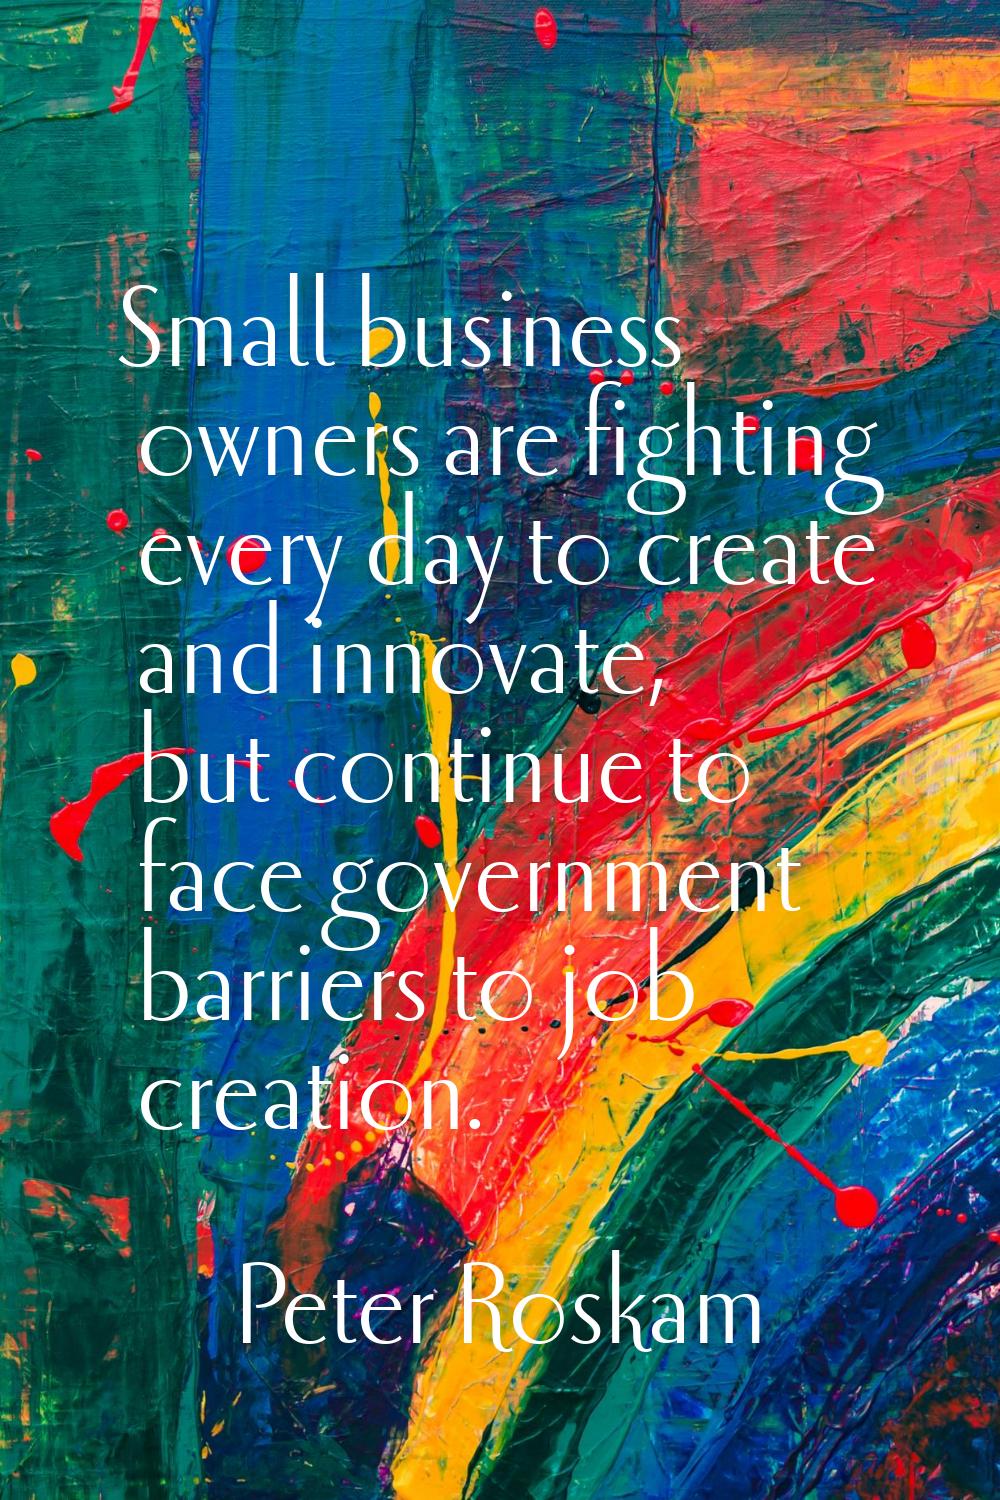 Small business owners are fighting every day to create and innovate, but continue to face governmen